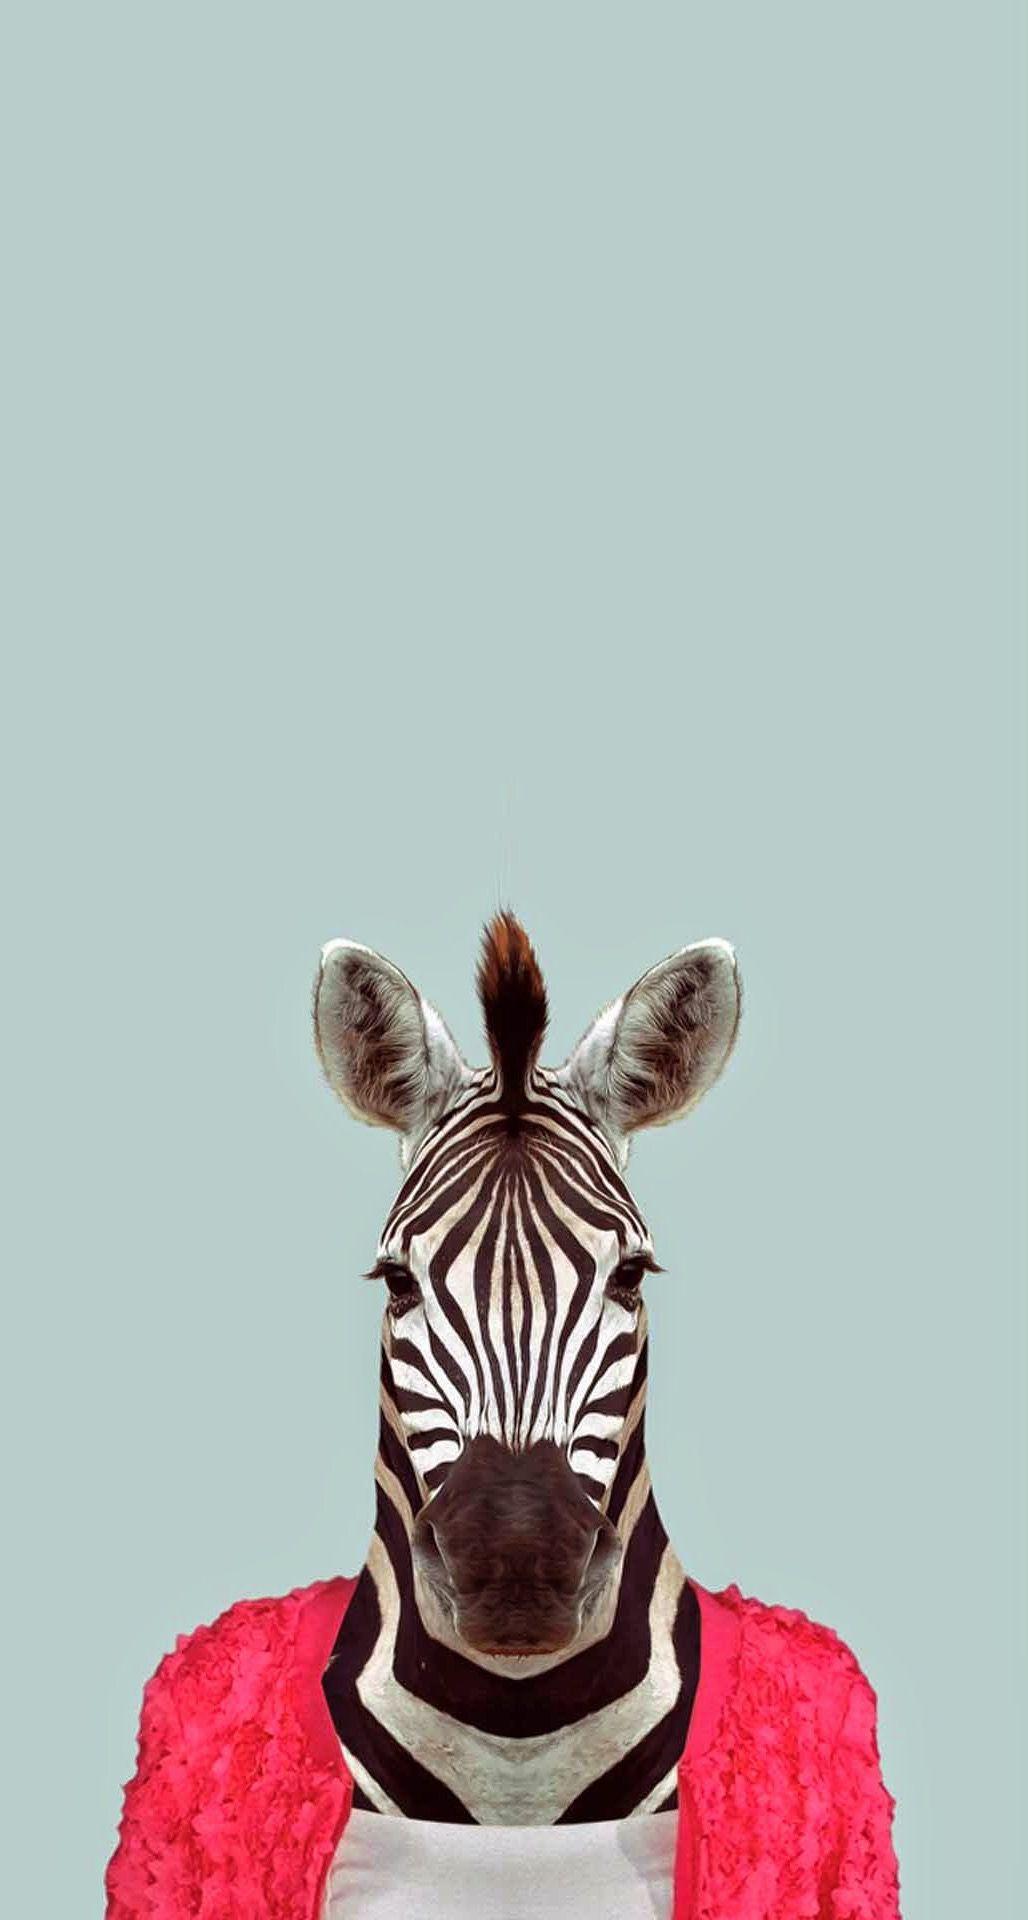 Cute Animals iPhone Wallpaper You Would Love to Download